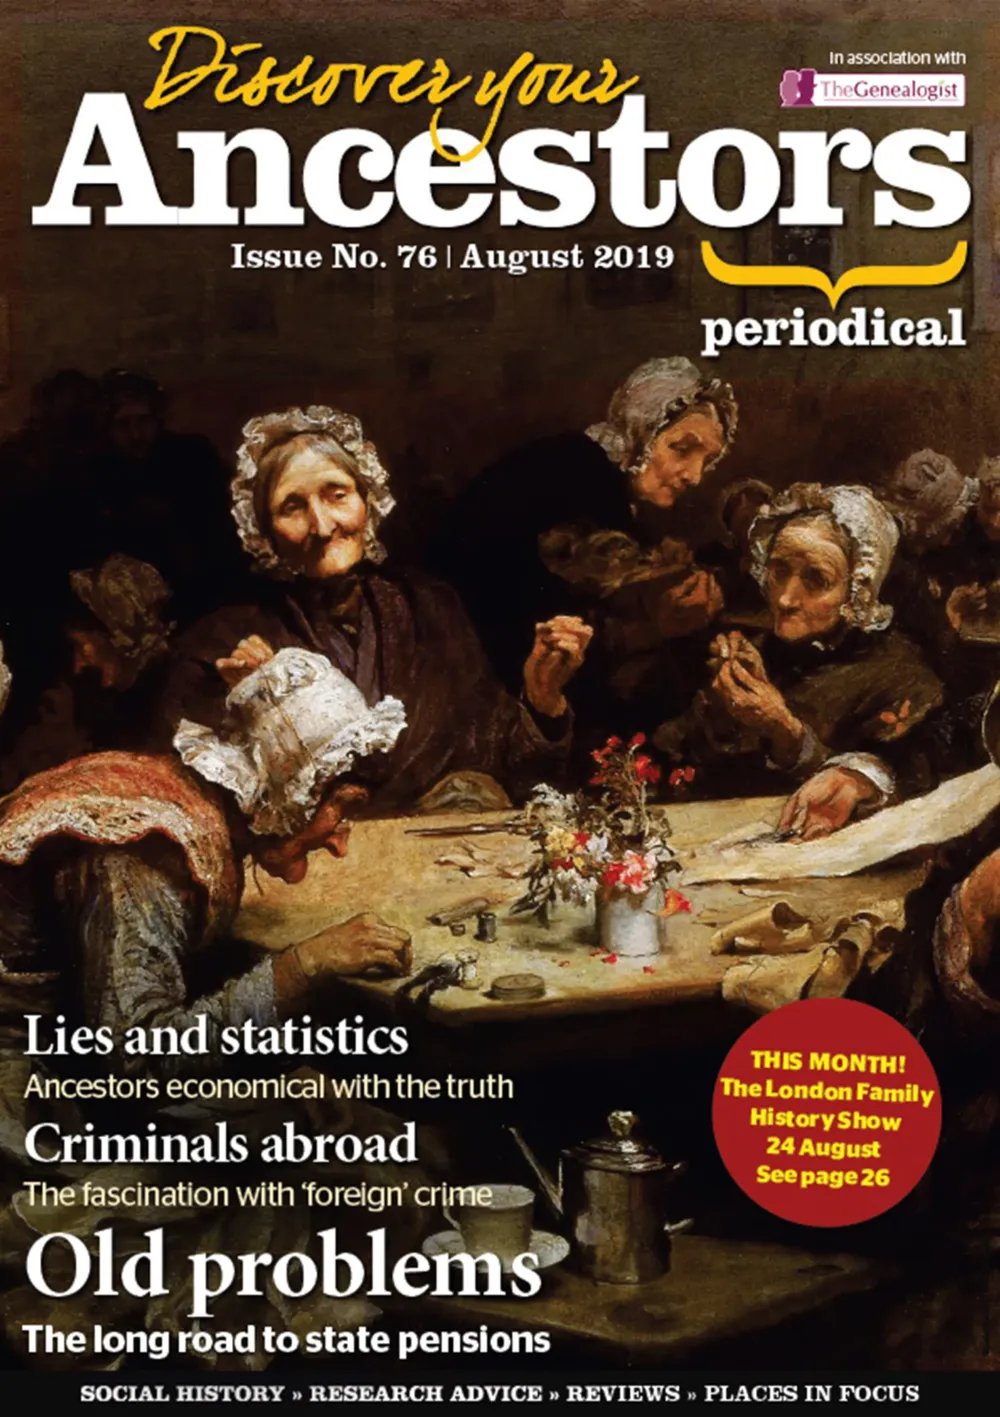 Discover Your Ancestors Periodical - August 2019